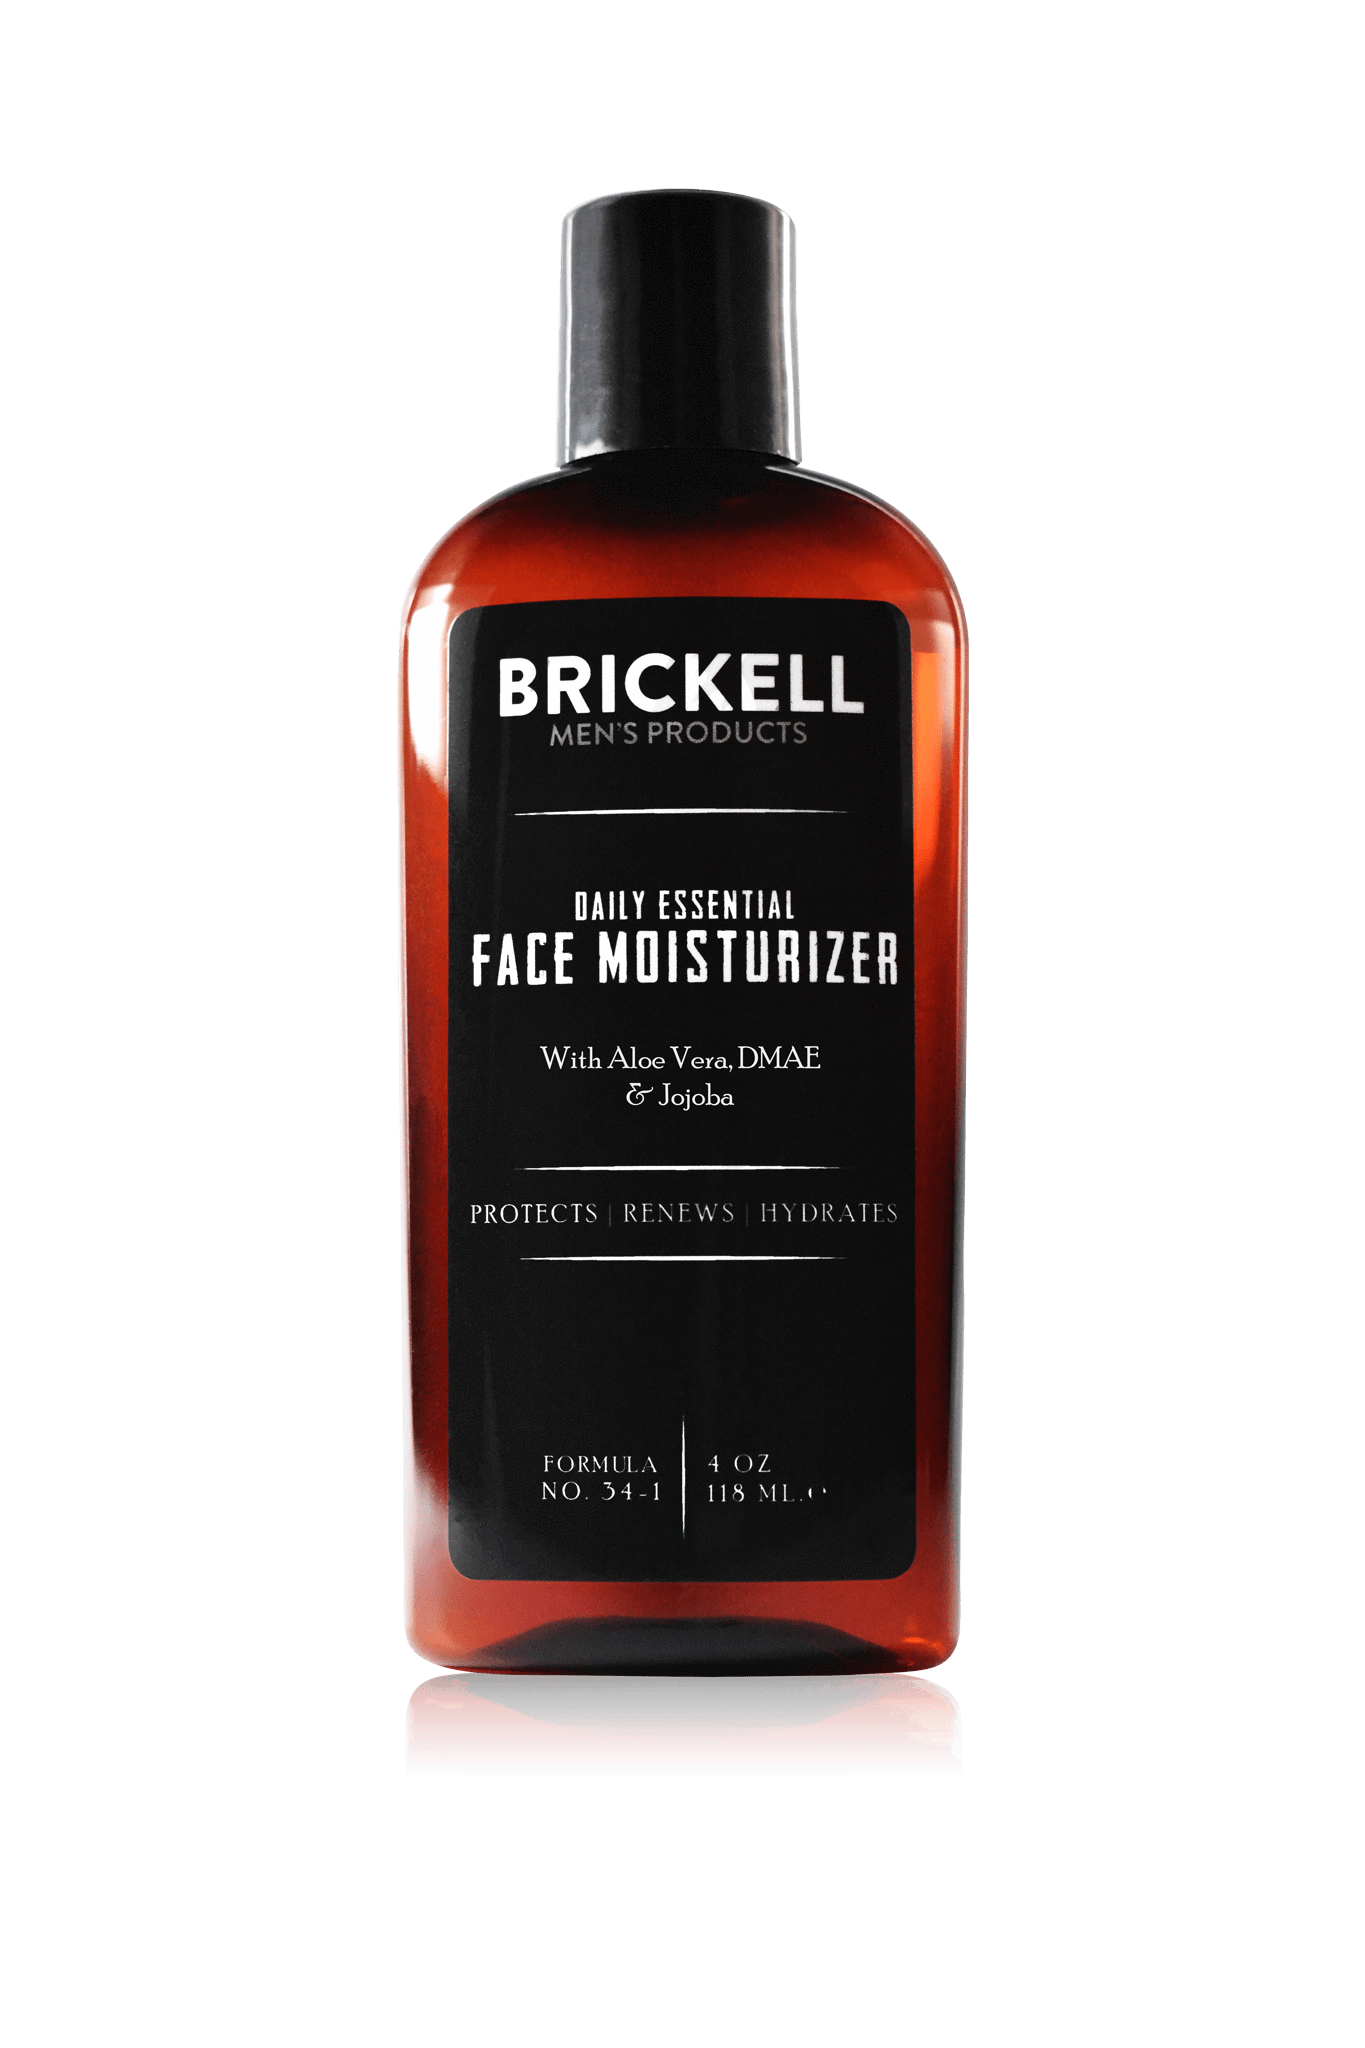 The Best Natural Face Moisturizer For Men | Brickell Men's Products